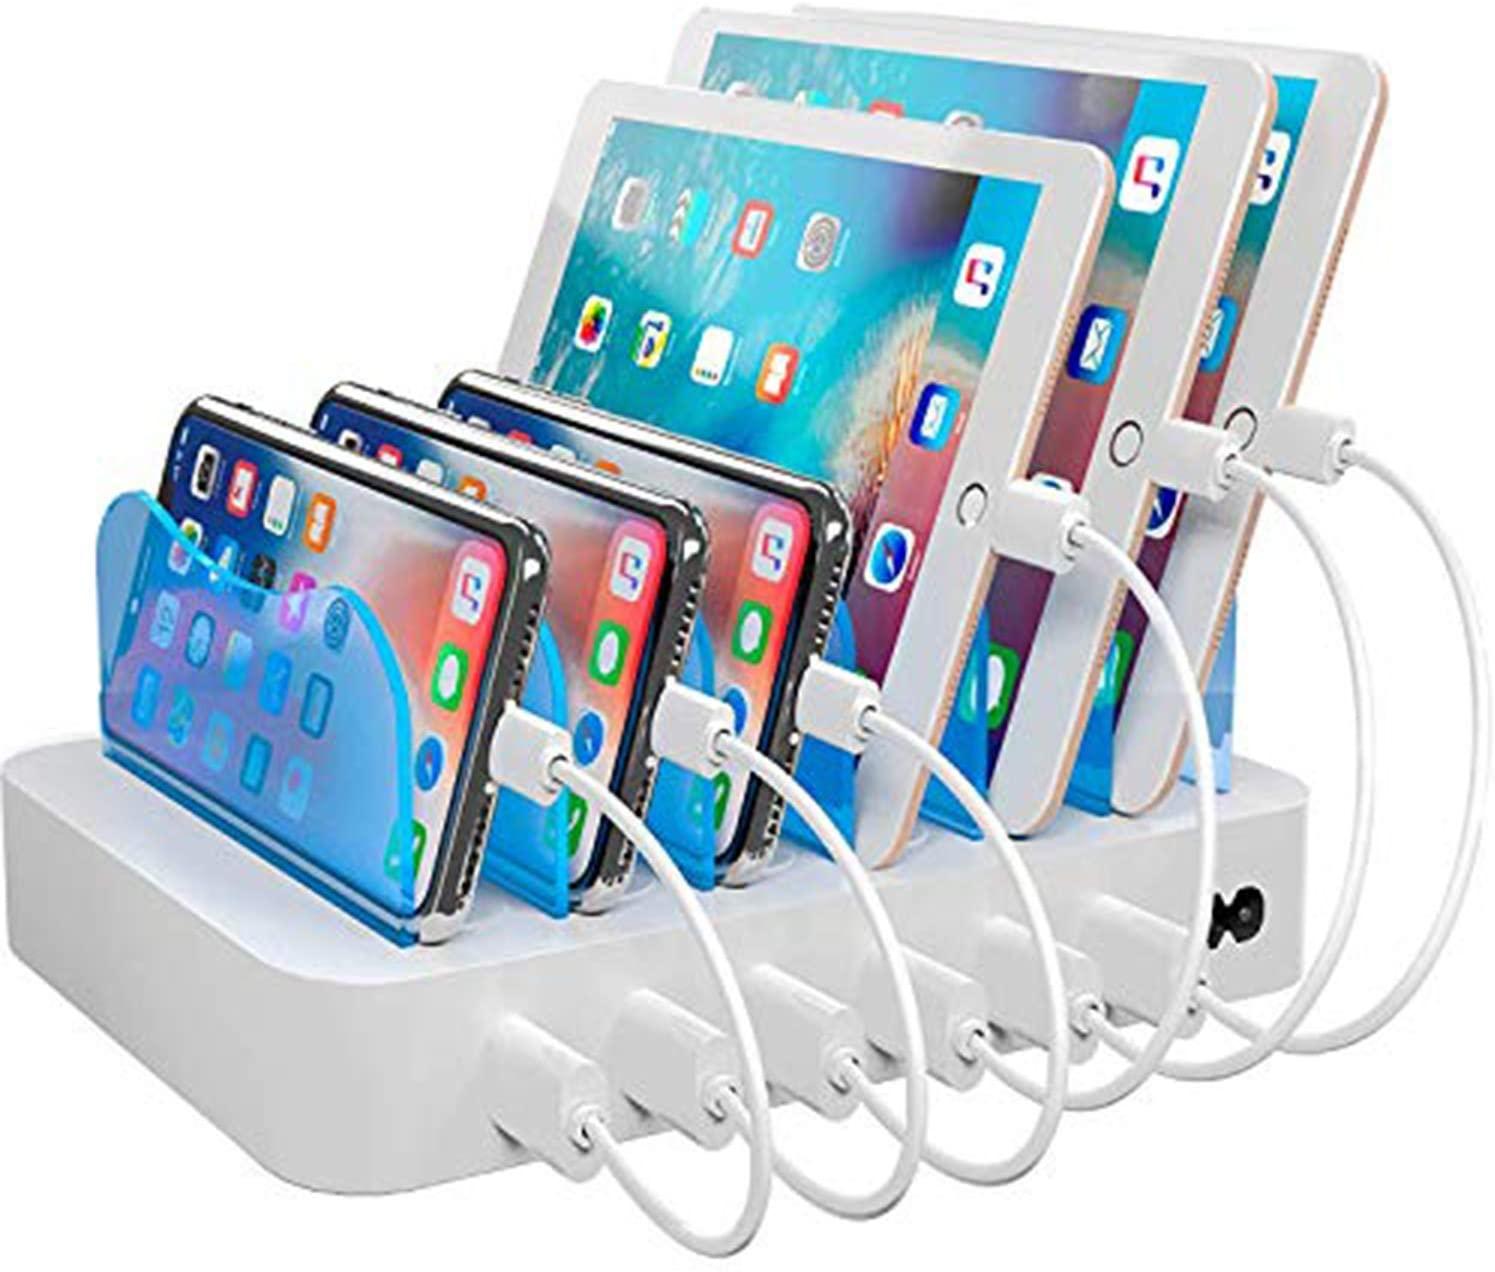 6 USB Fast Ports Charging Station for $23.79